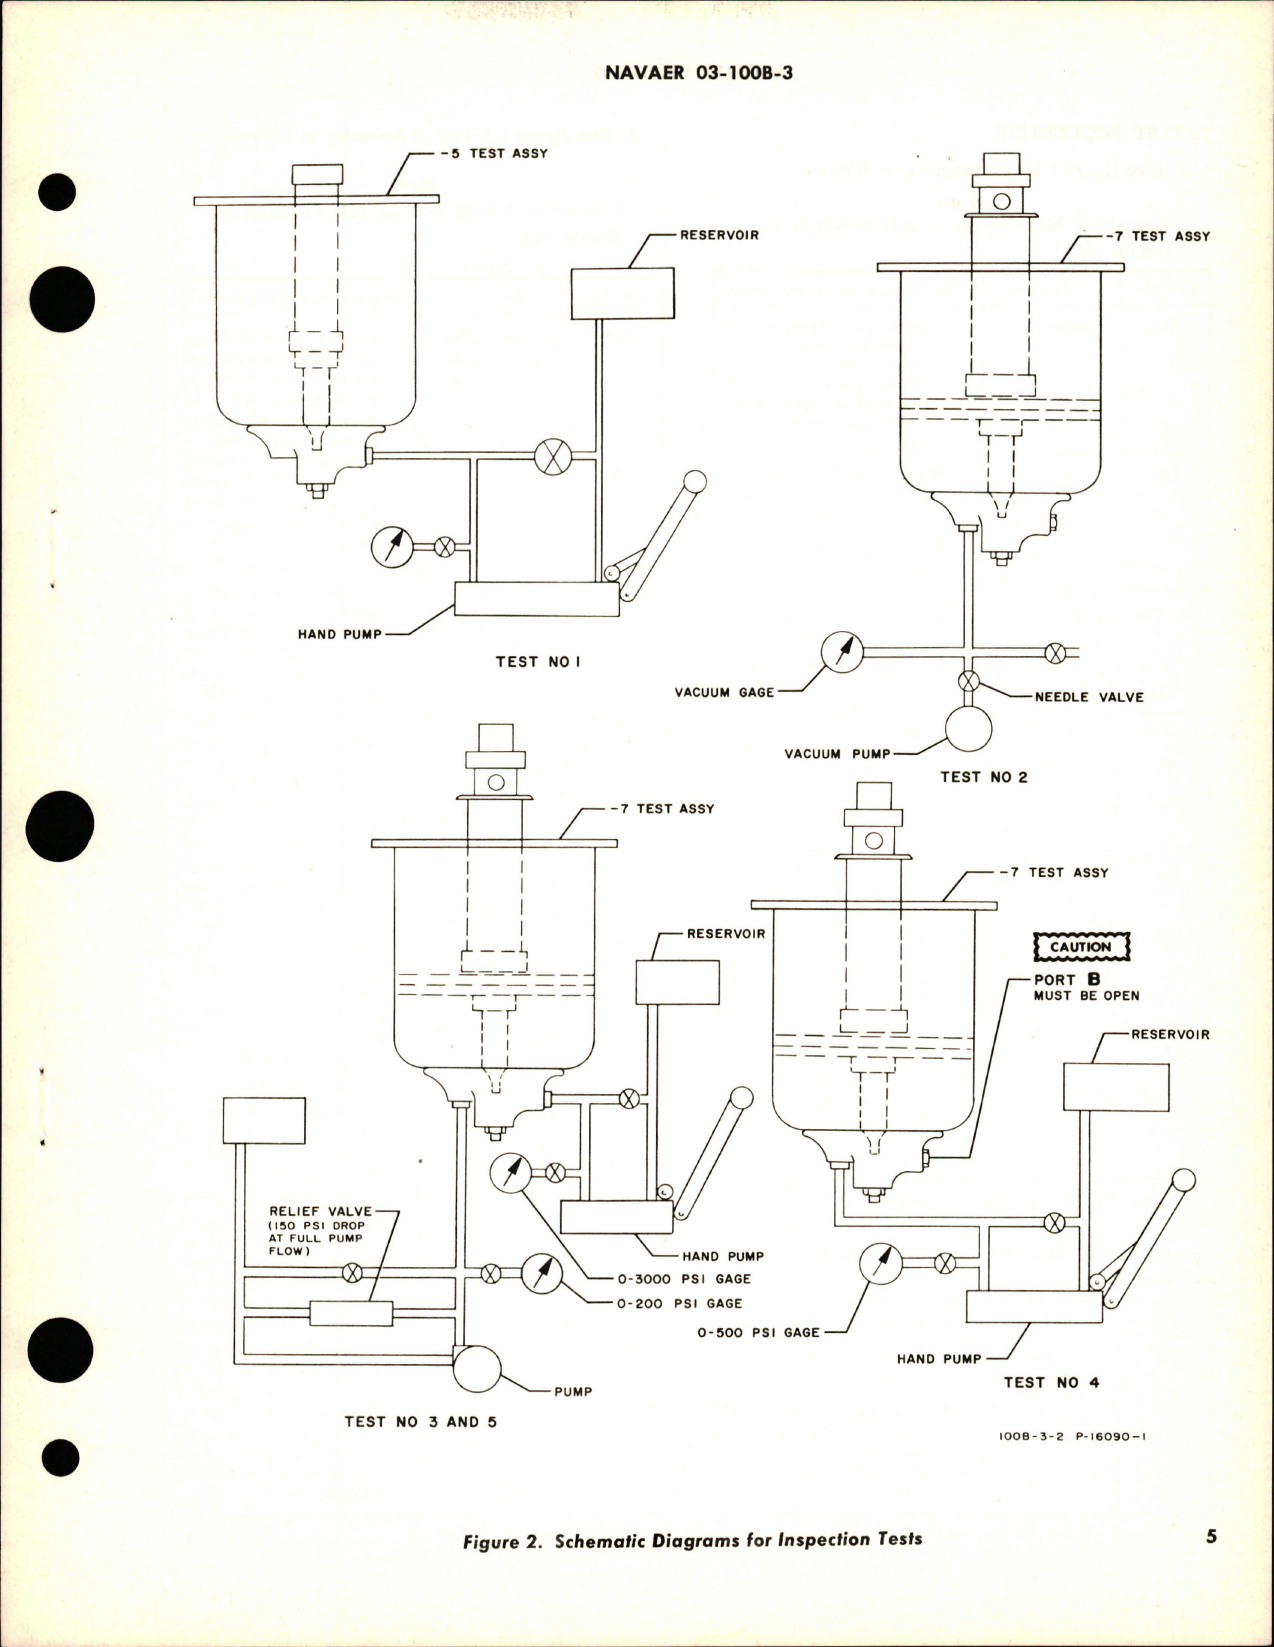 Sample page 5 from AirCorps Library document: Overhaul Instructions with Parts Breakdown for Hydraulic System Reservoir Assembly - 5546990-503